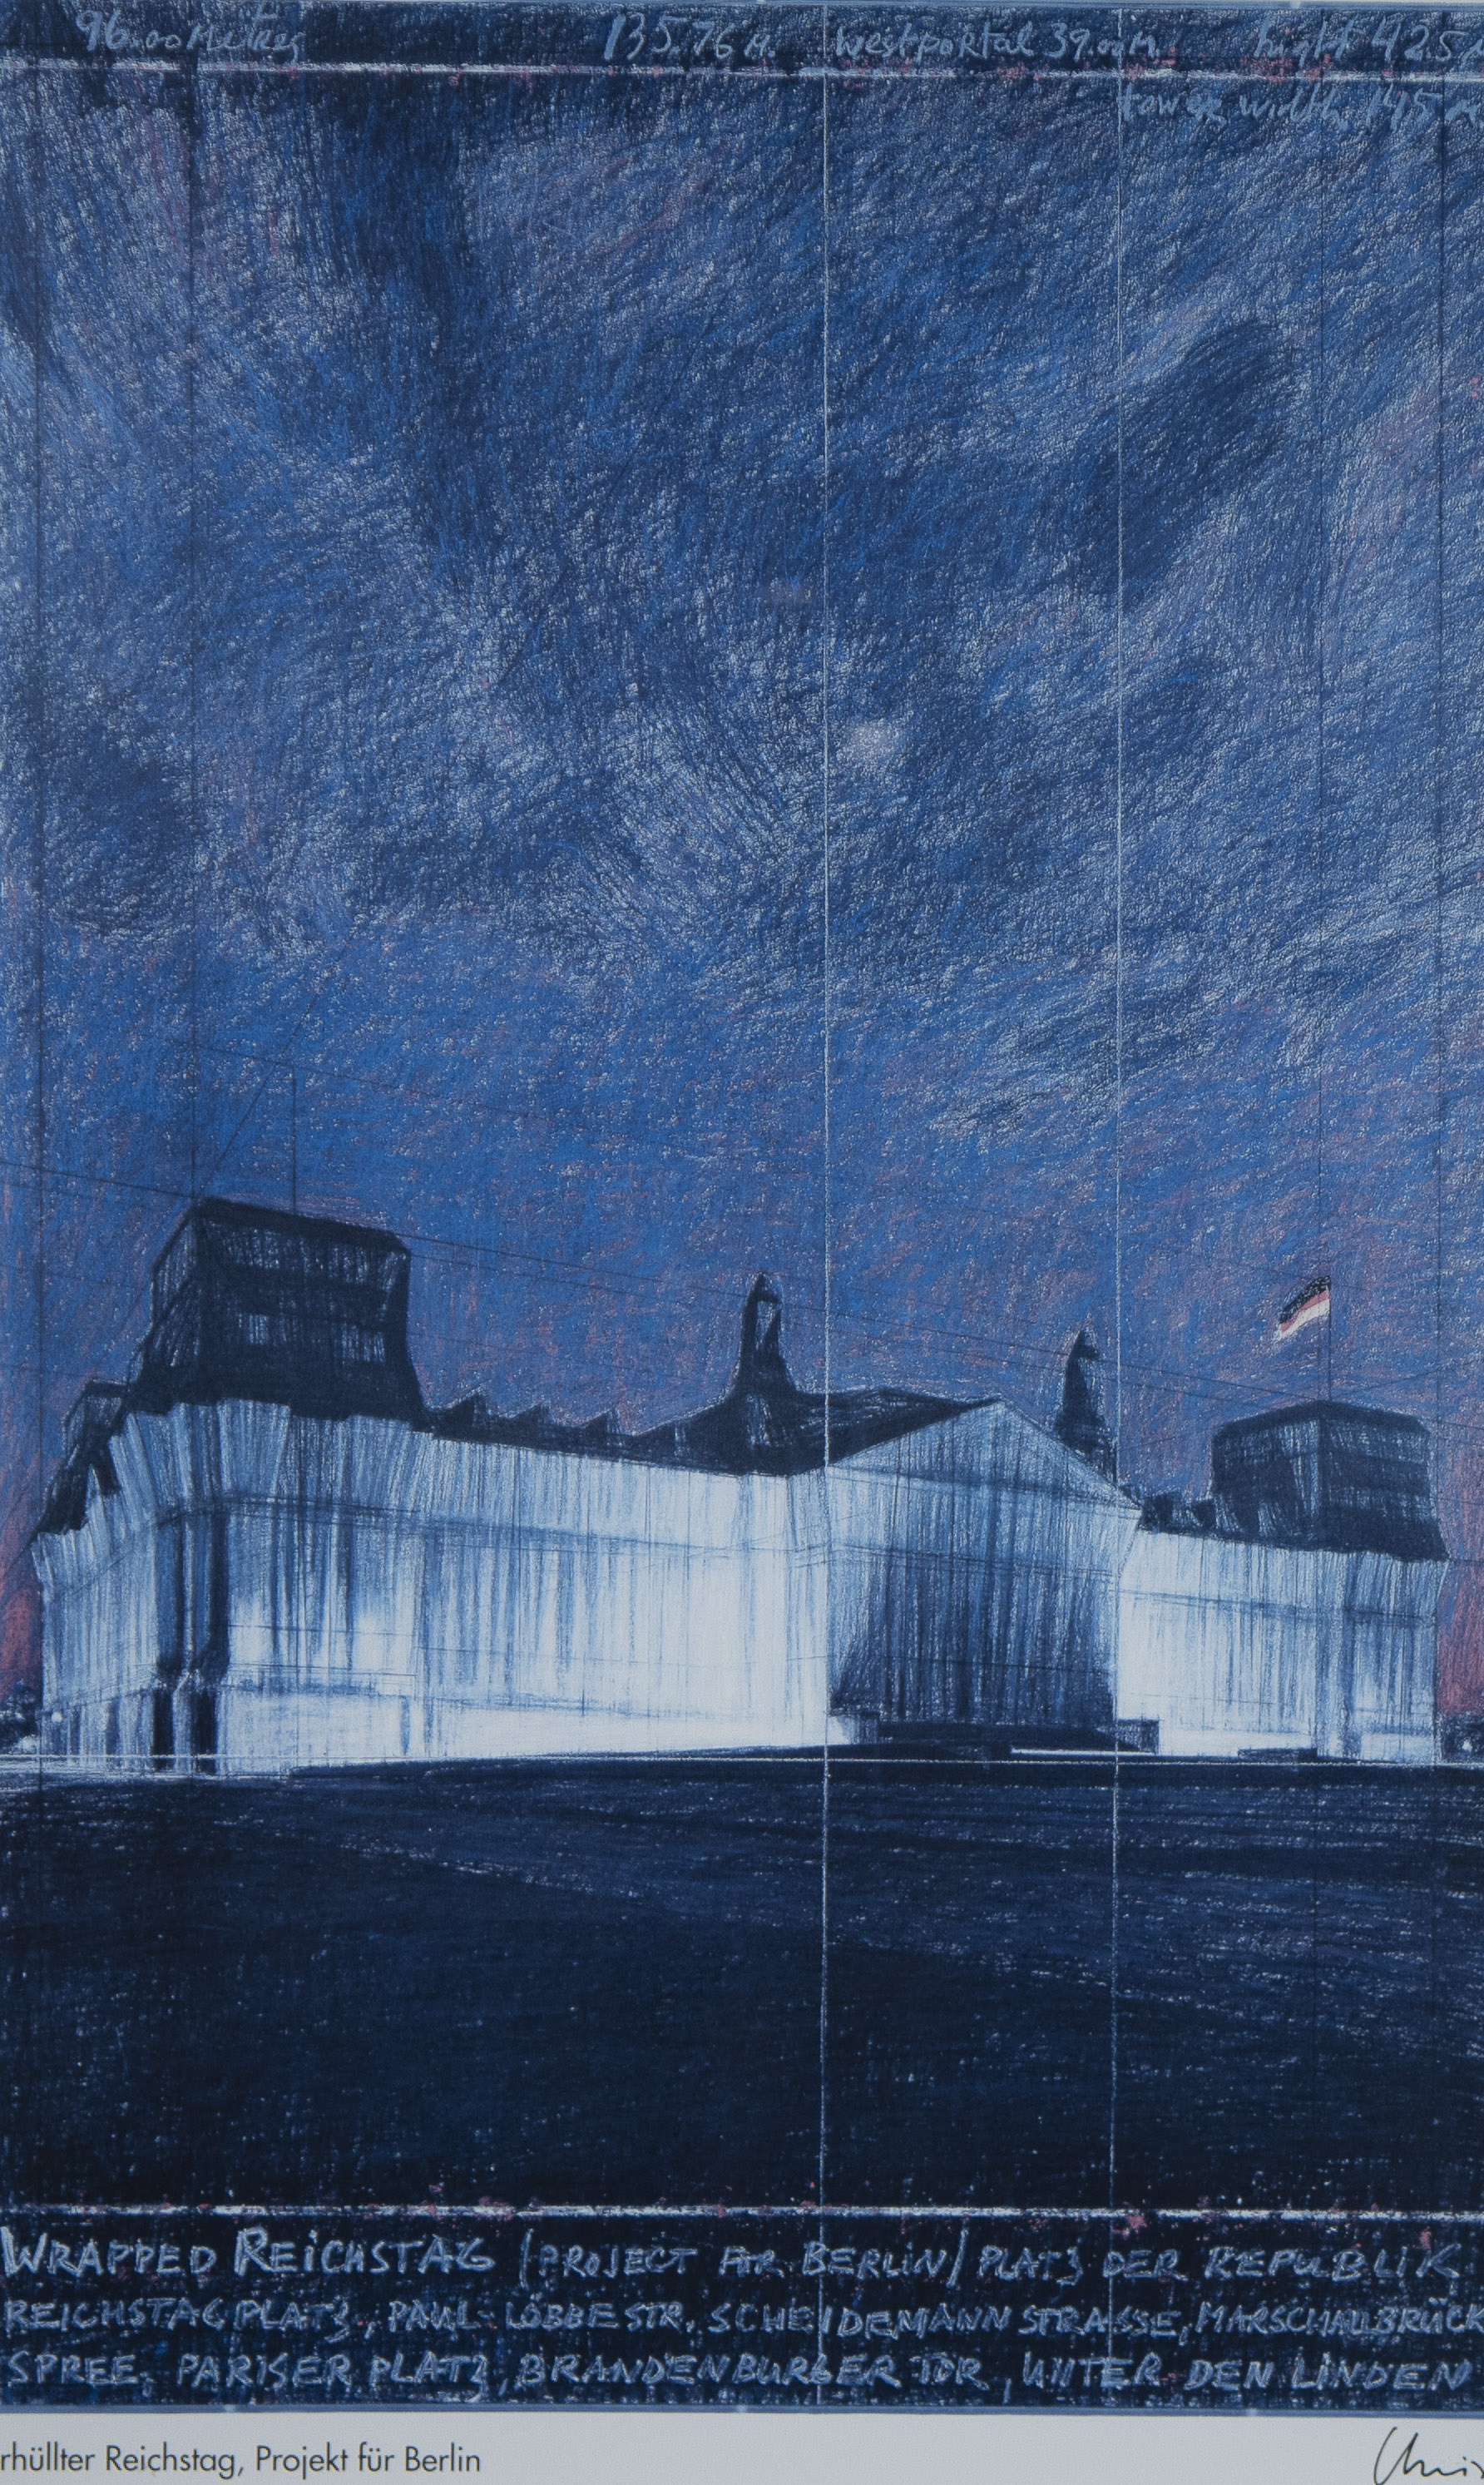 CHRISTO (1935-2020), offset lithography Projekt für Berlin, Wrapped Reichstag en The Wrapped Reichst - Image 3 of 5